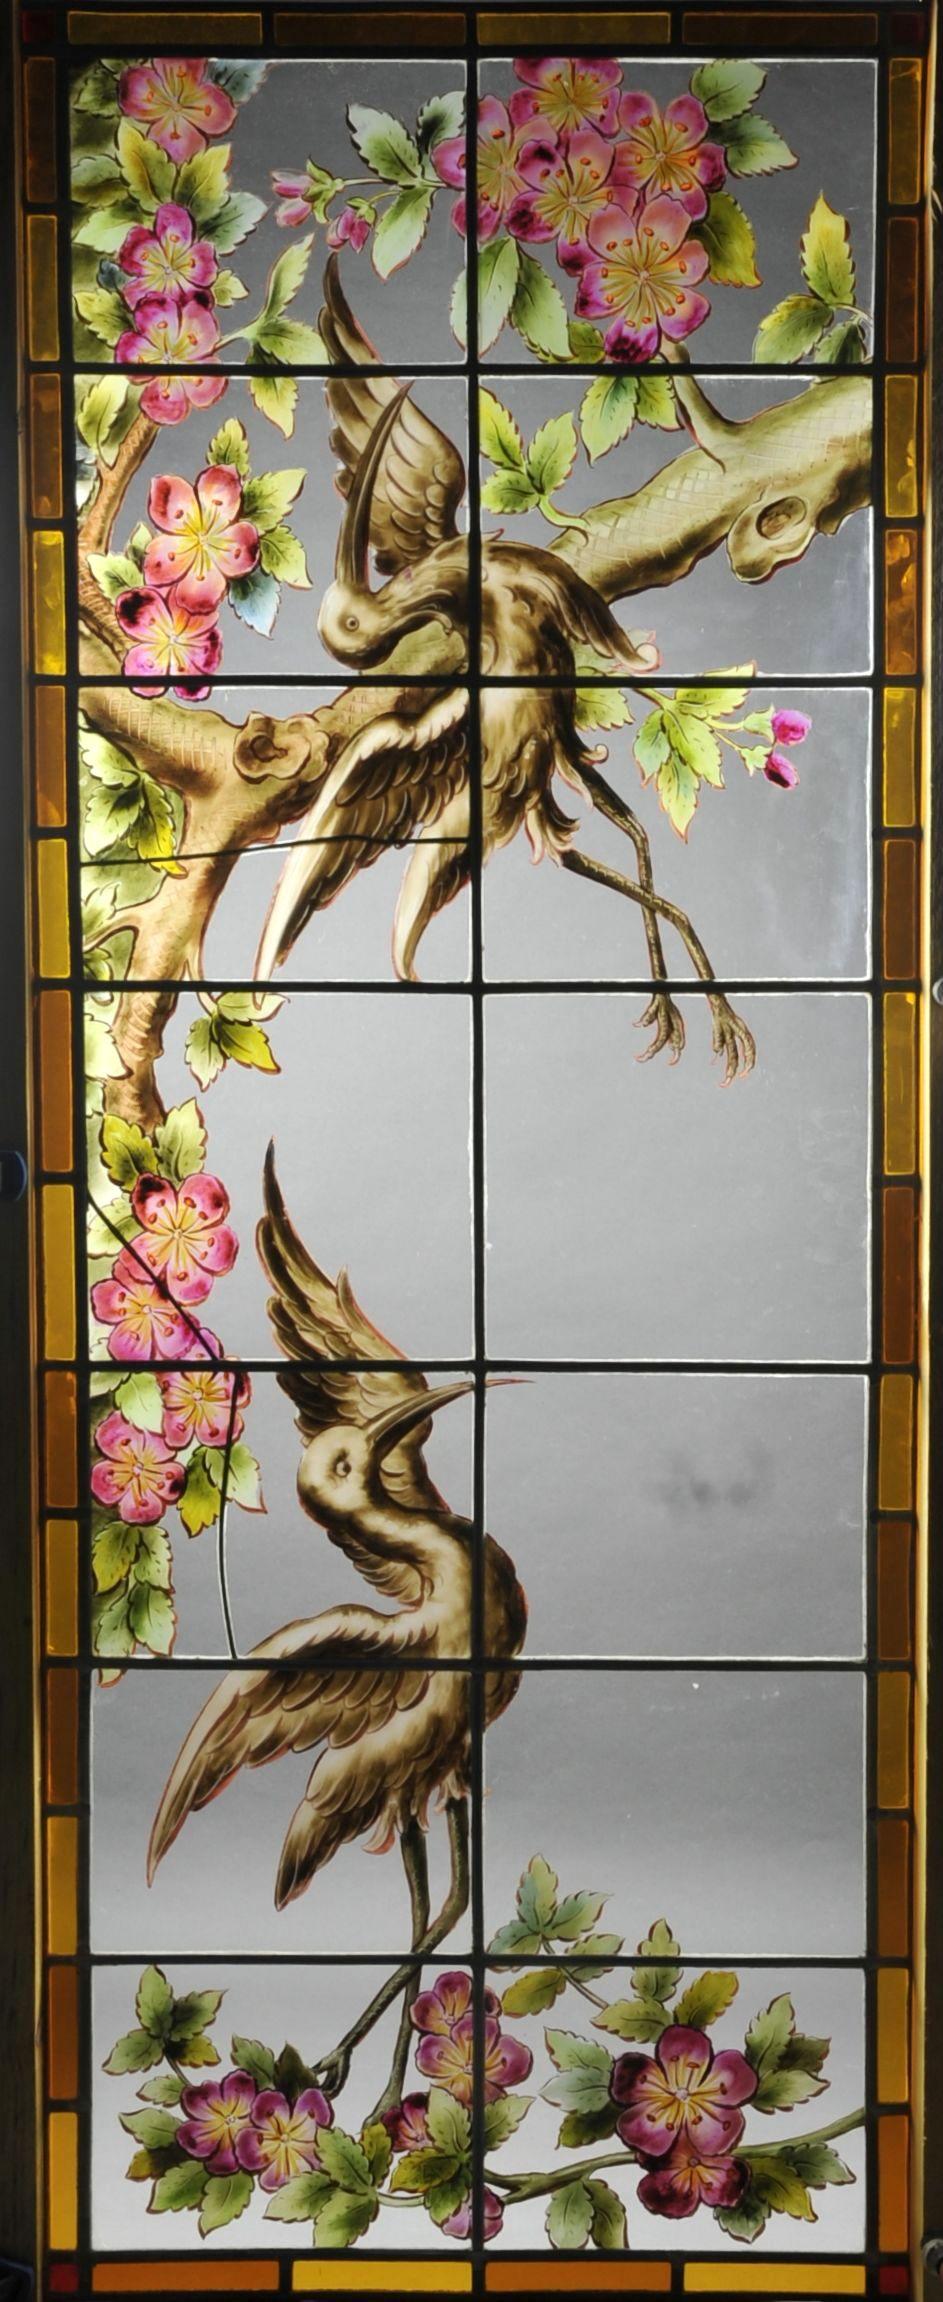 Beautiful stained glass from the Art Nouveau period with rich polychrome decoration depicting two stylized birds evolving in a plant and floral environment.

Two-tone frieze on the waistband.

Very beautiful colors, very bright.

Winter garden